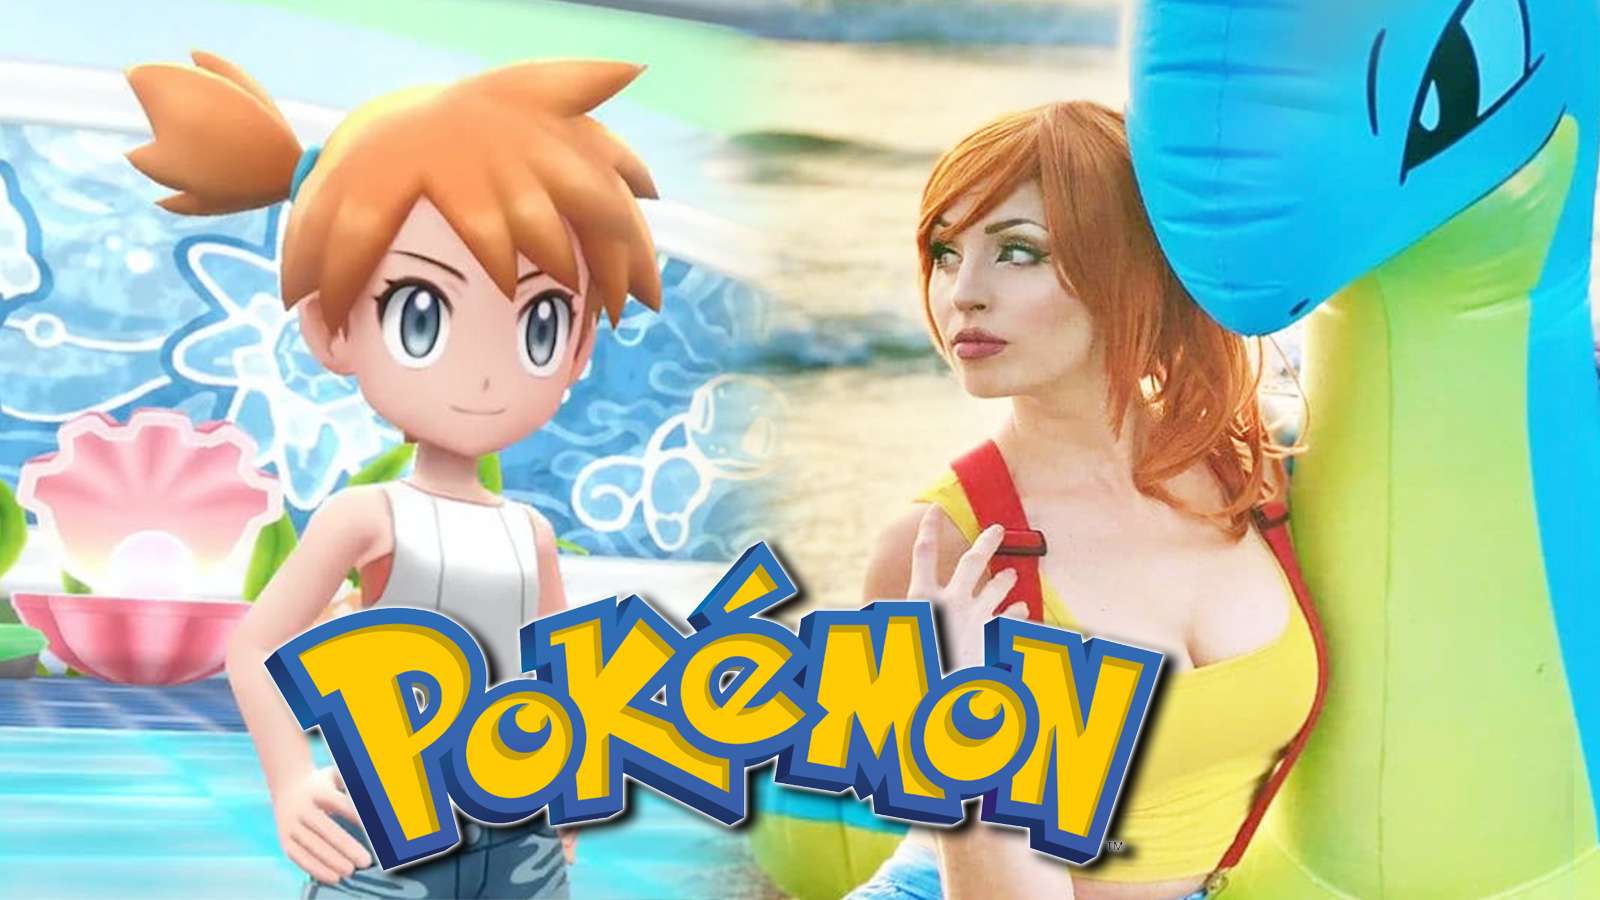 Screenshot of Misty from Pokemon Lets Go Pikachu next to cosplayer.